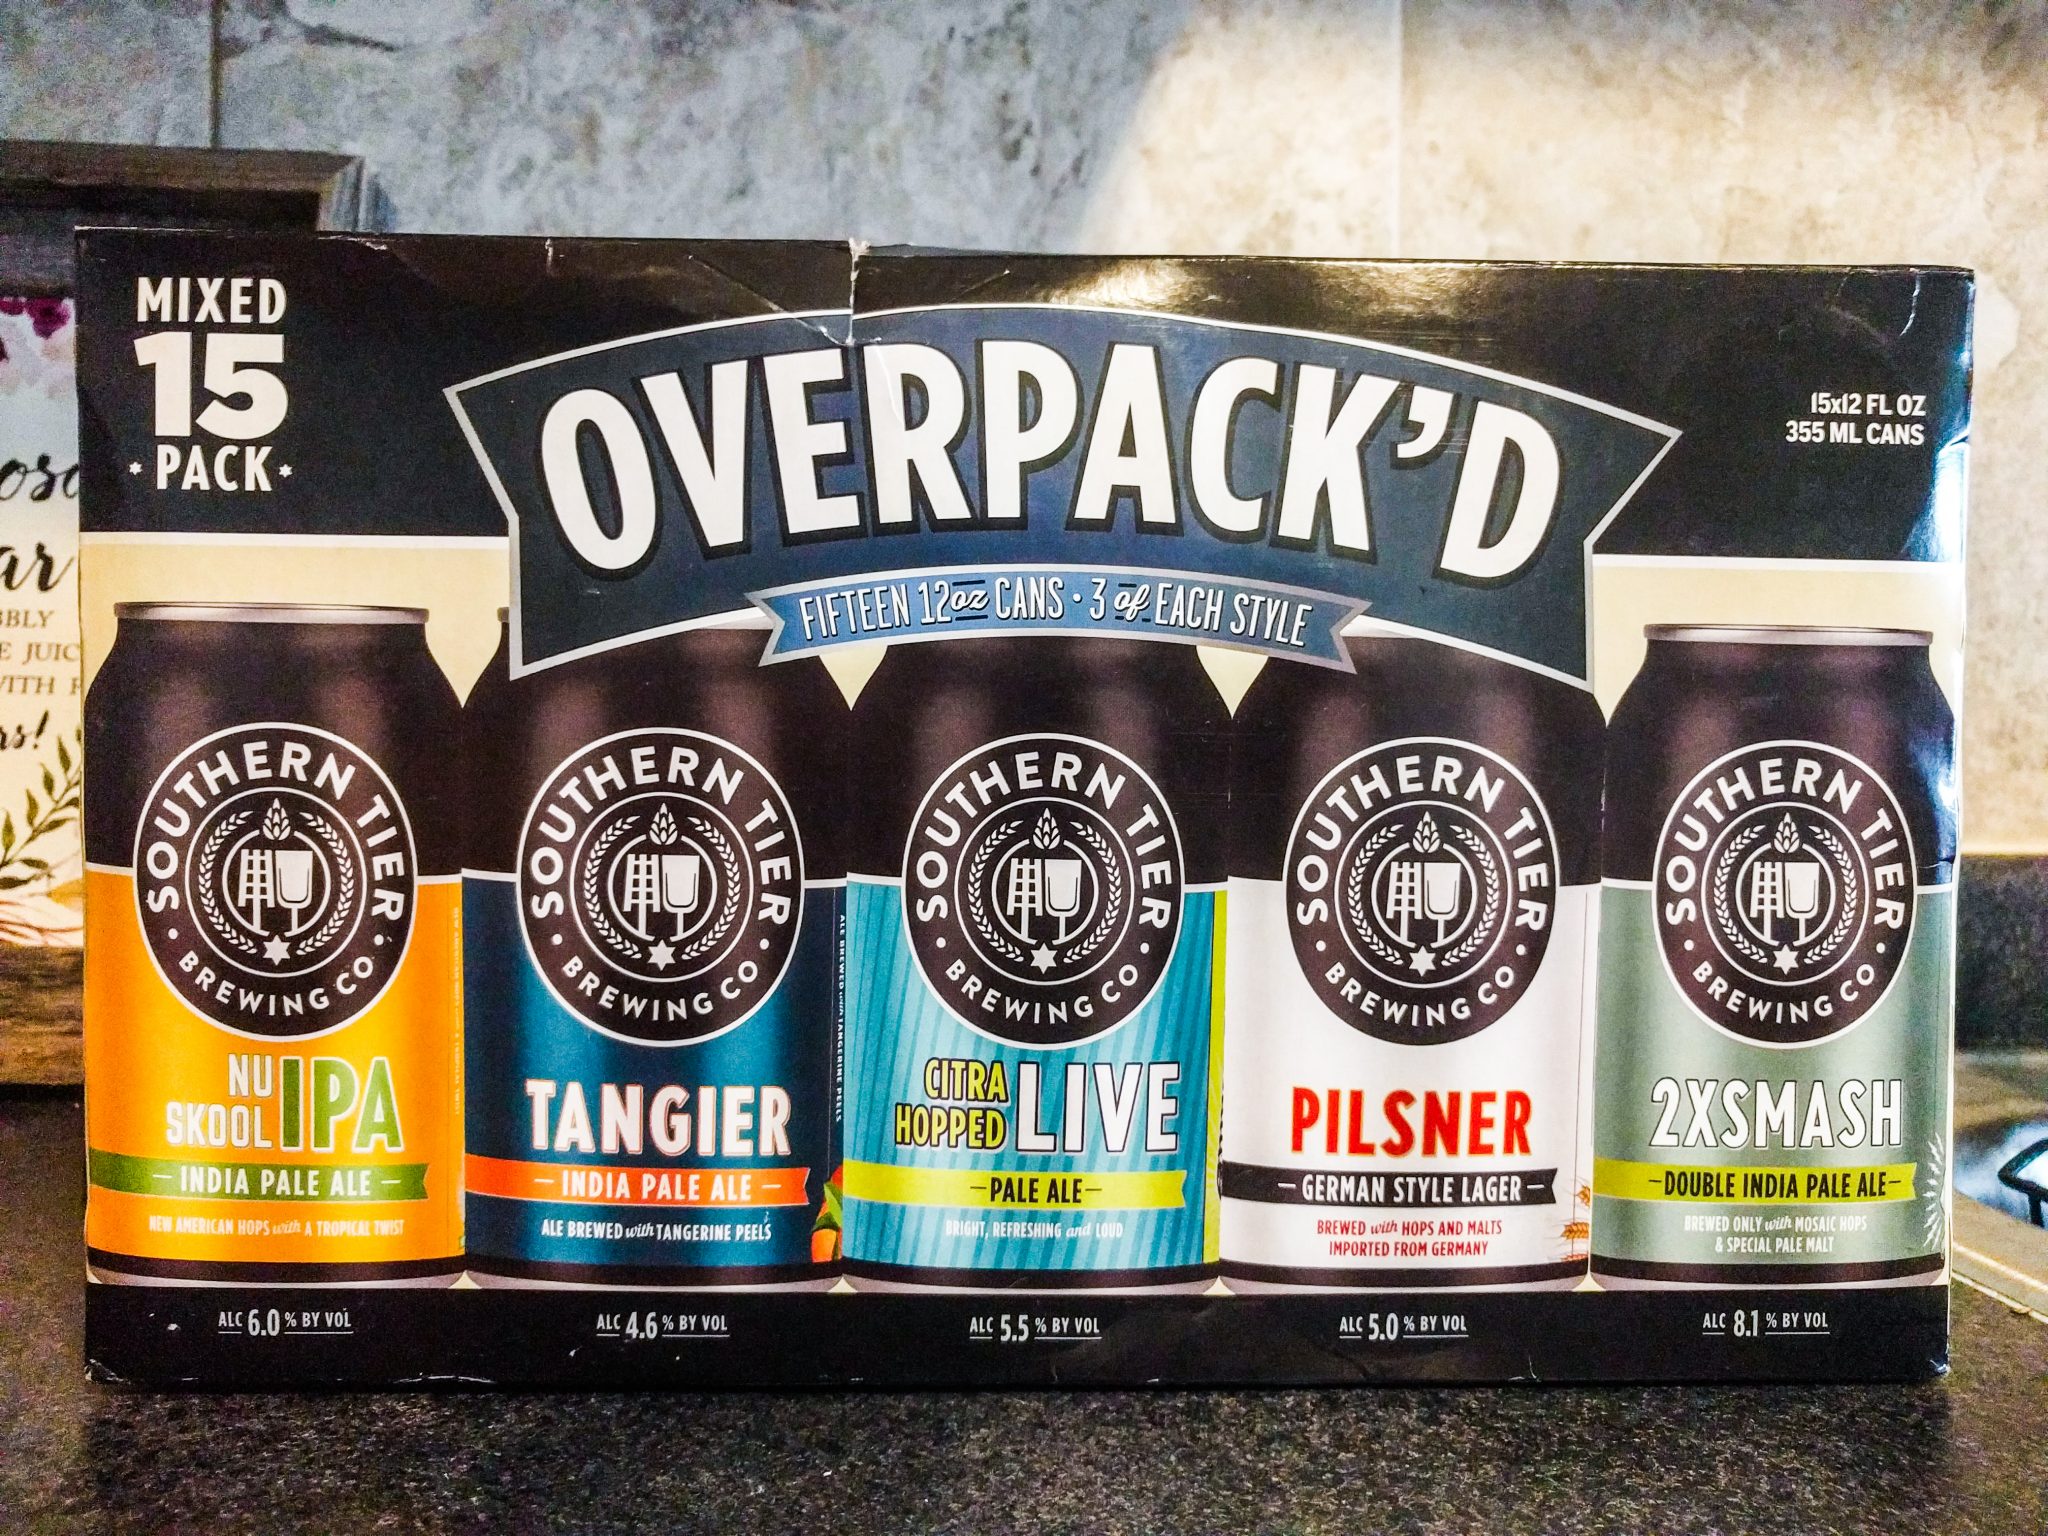 Southern Tier Variety Pack of 15 beers